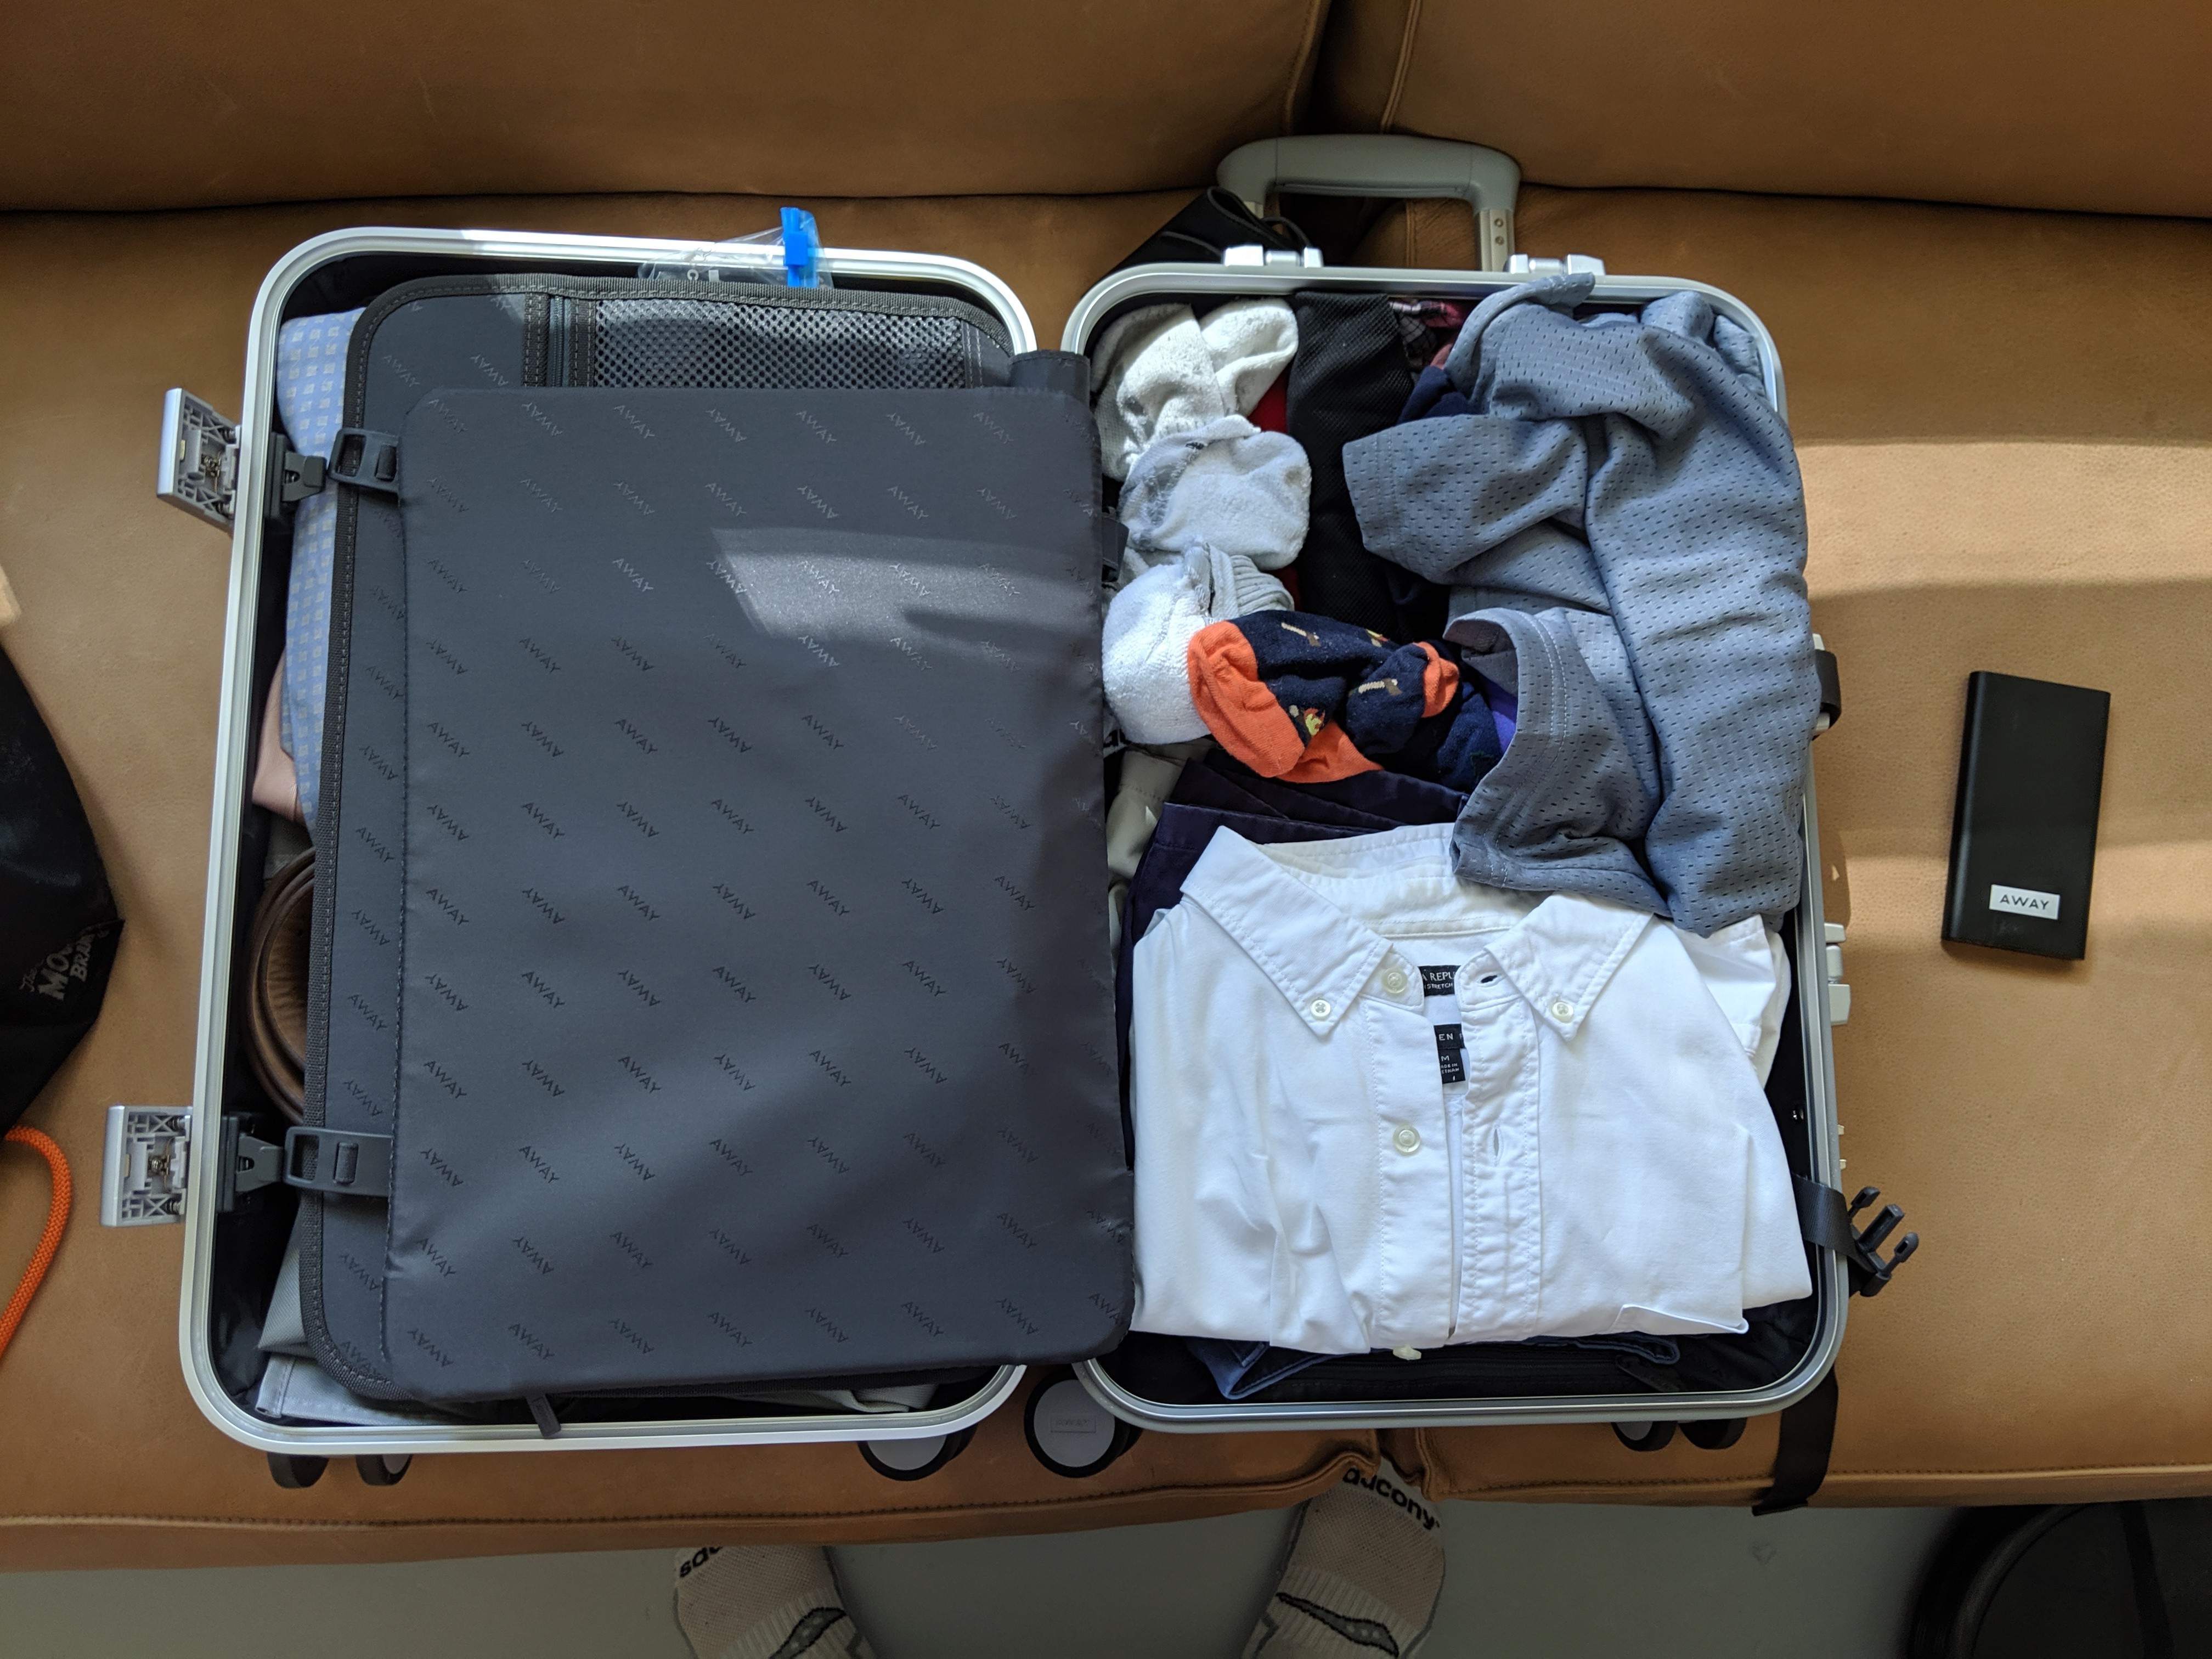 Review: Away's USB-powered Carry-On luggage helped me survive CES - 9to5Mac